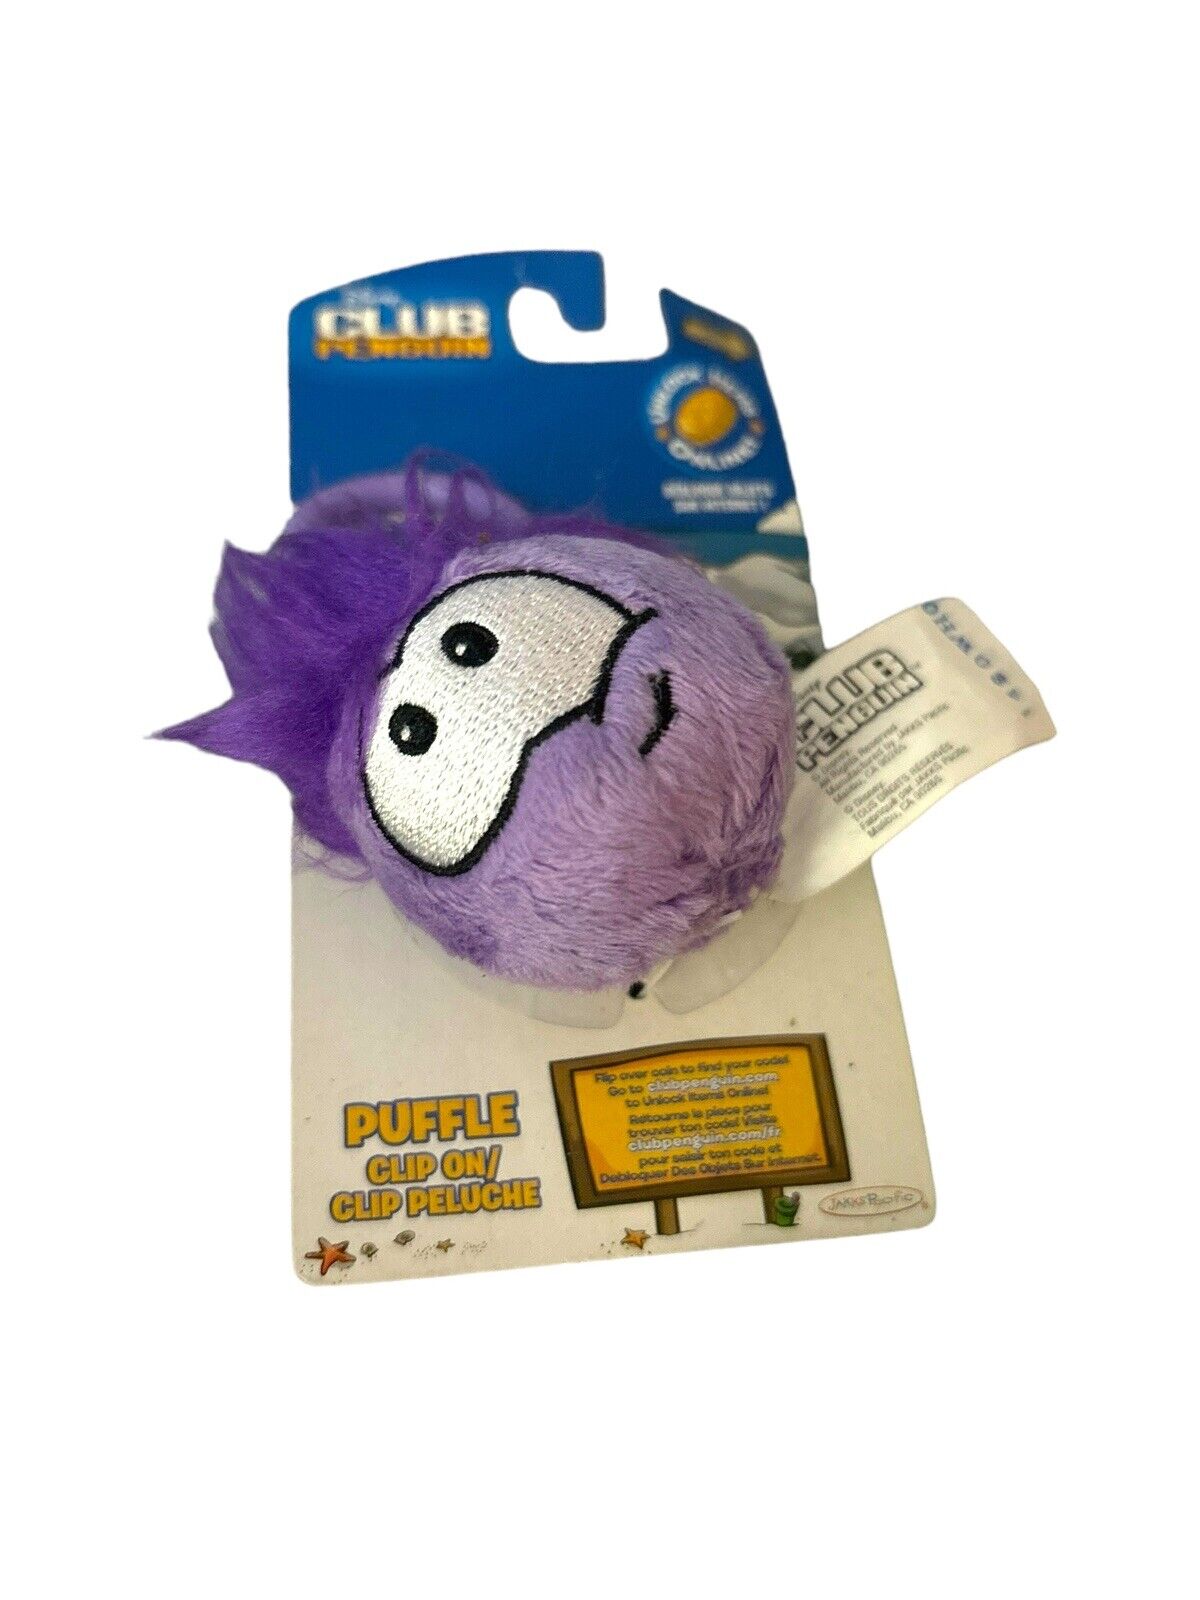 Disney Club Penguin Purple Puffle Clip On Plush Toy Fuzzy Dangler with Coin NOS